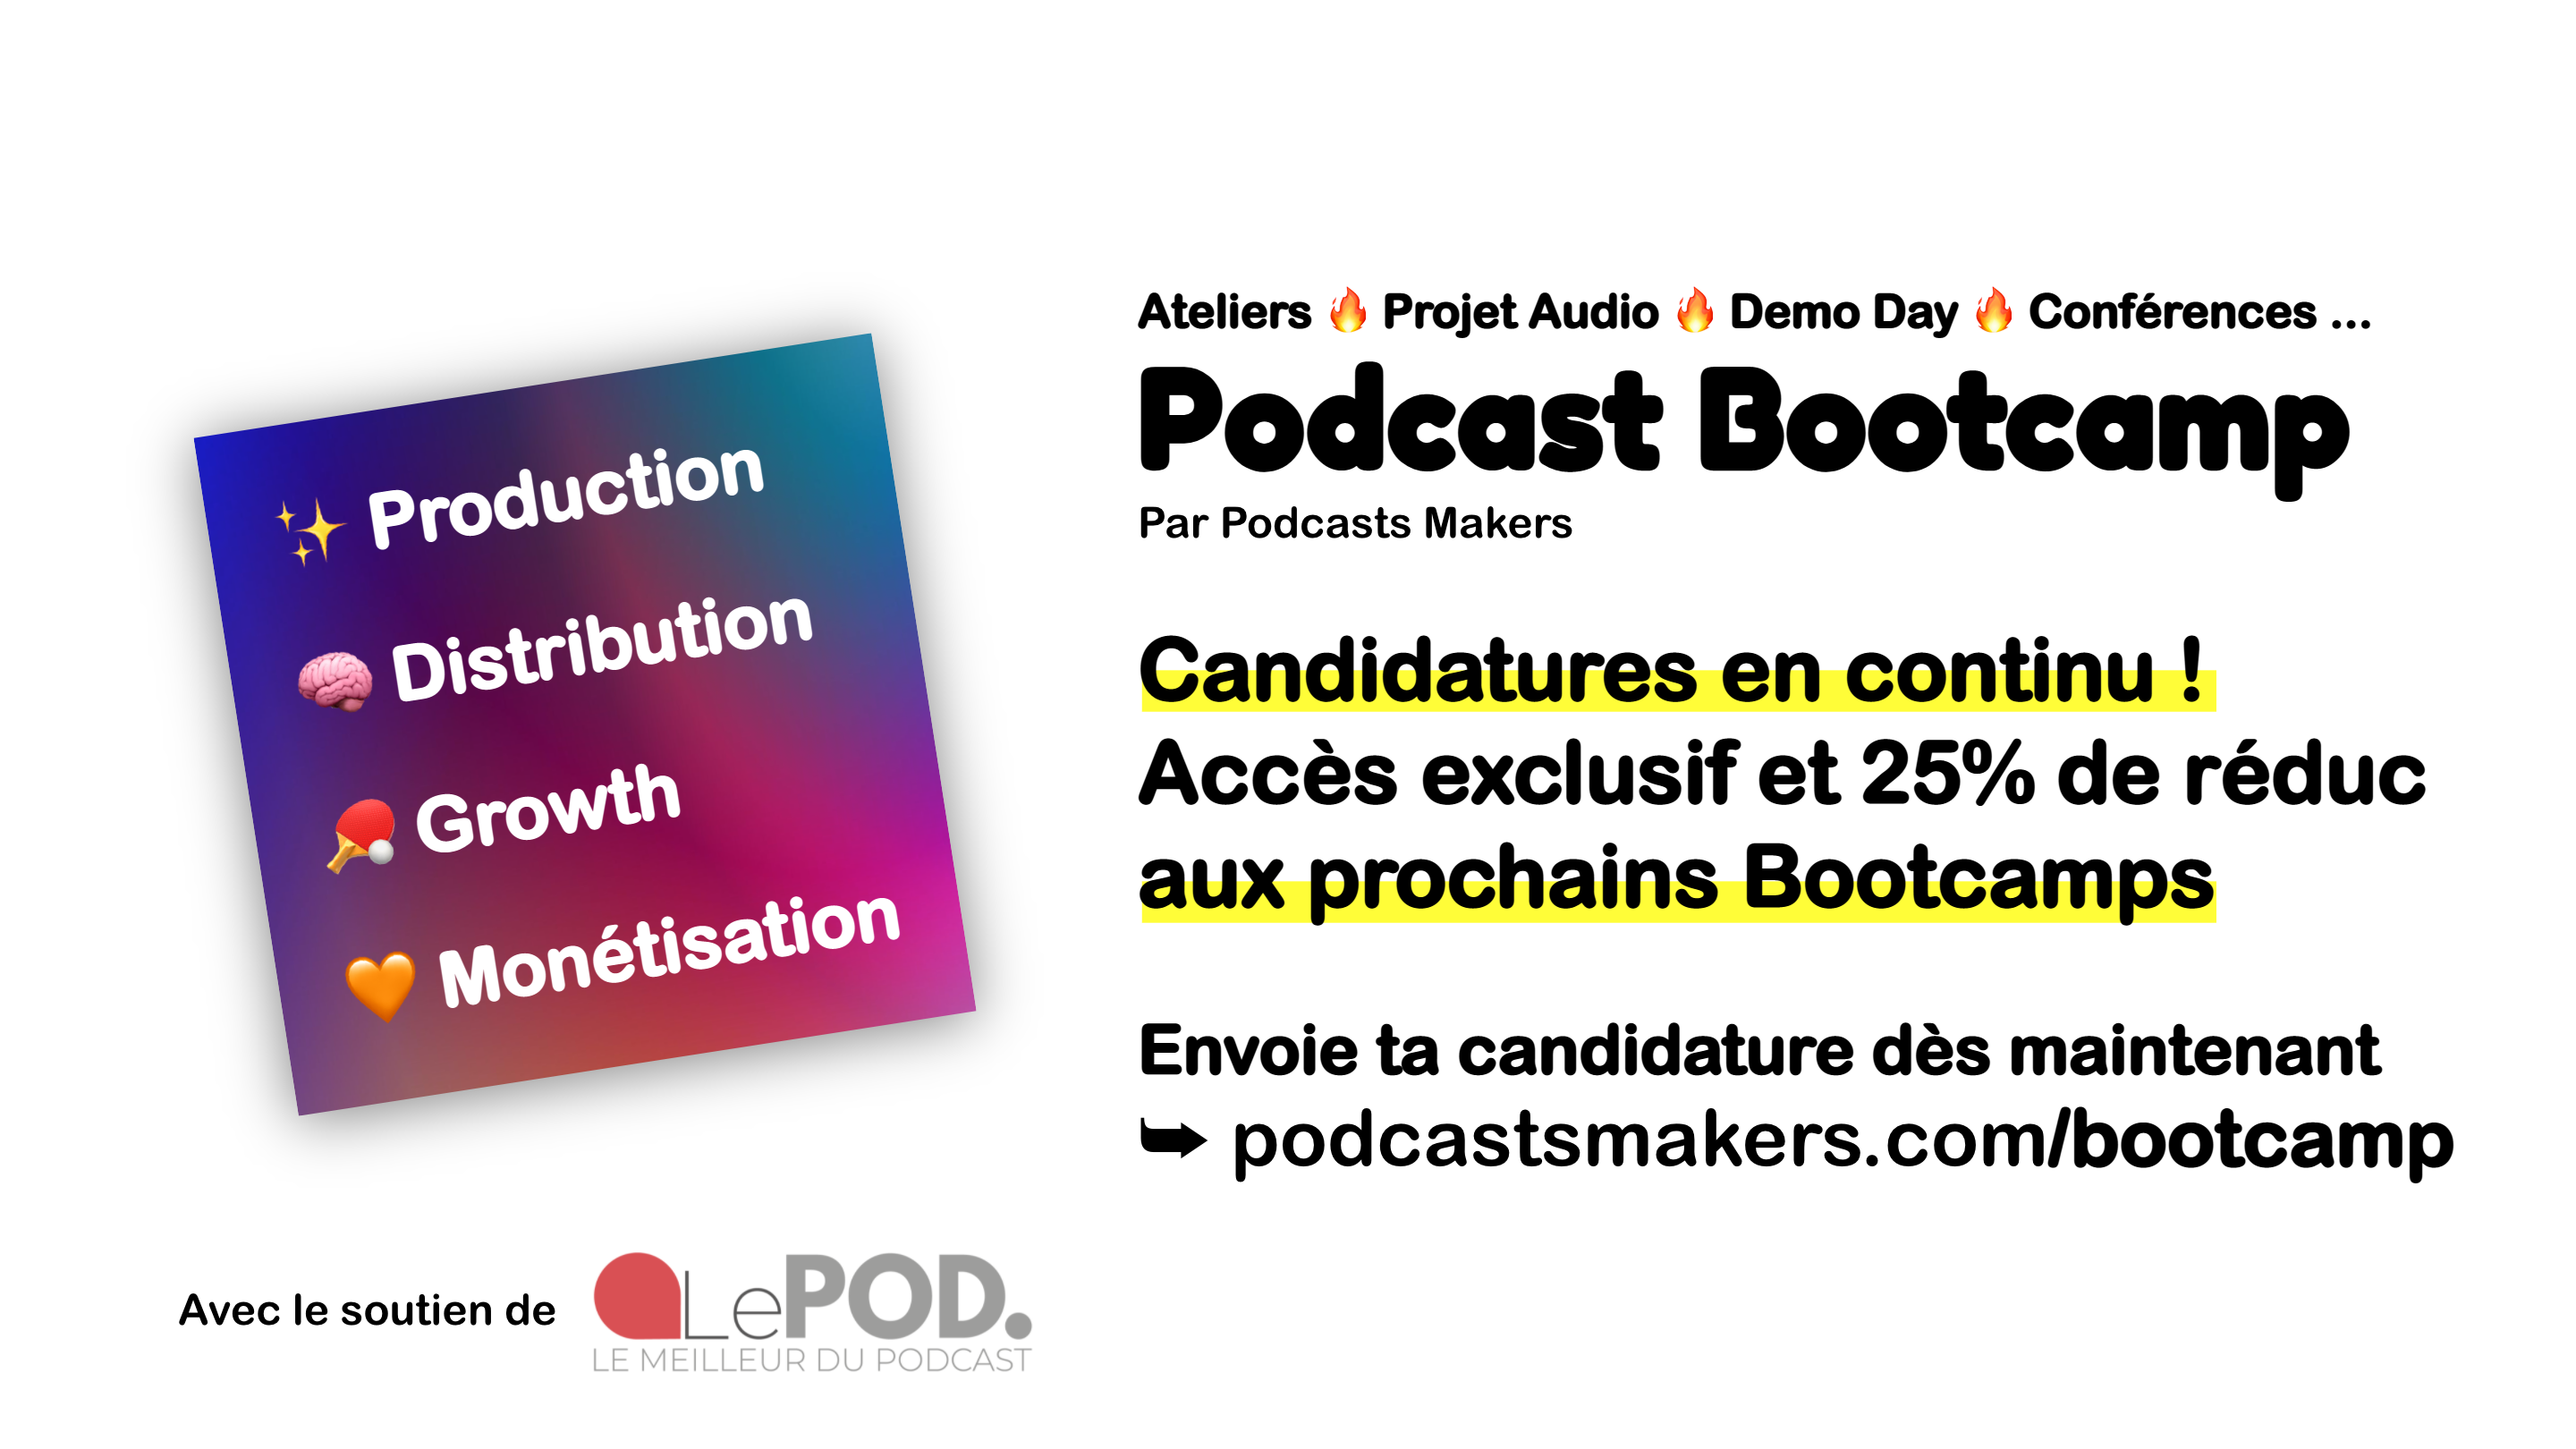 Podcast Bootcamp, par Podcasts Makers